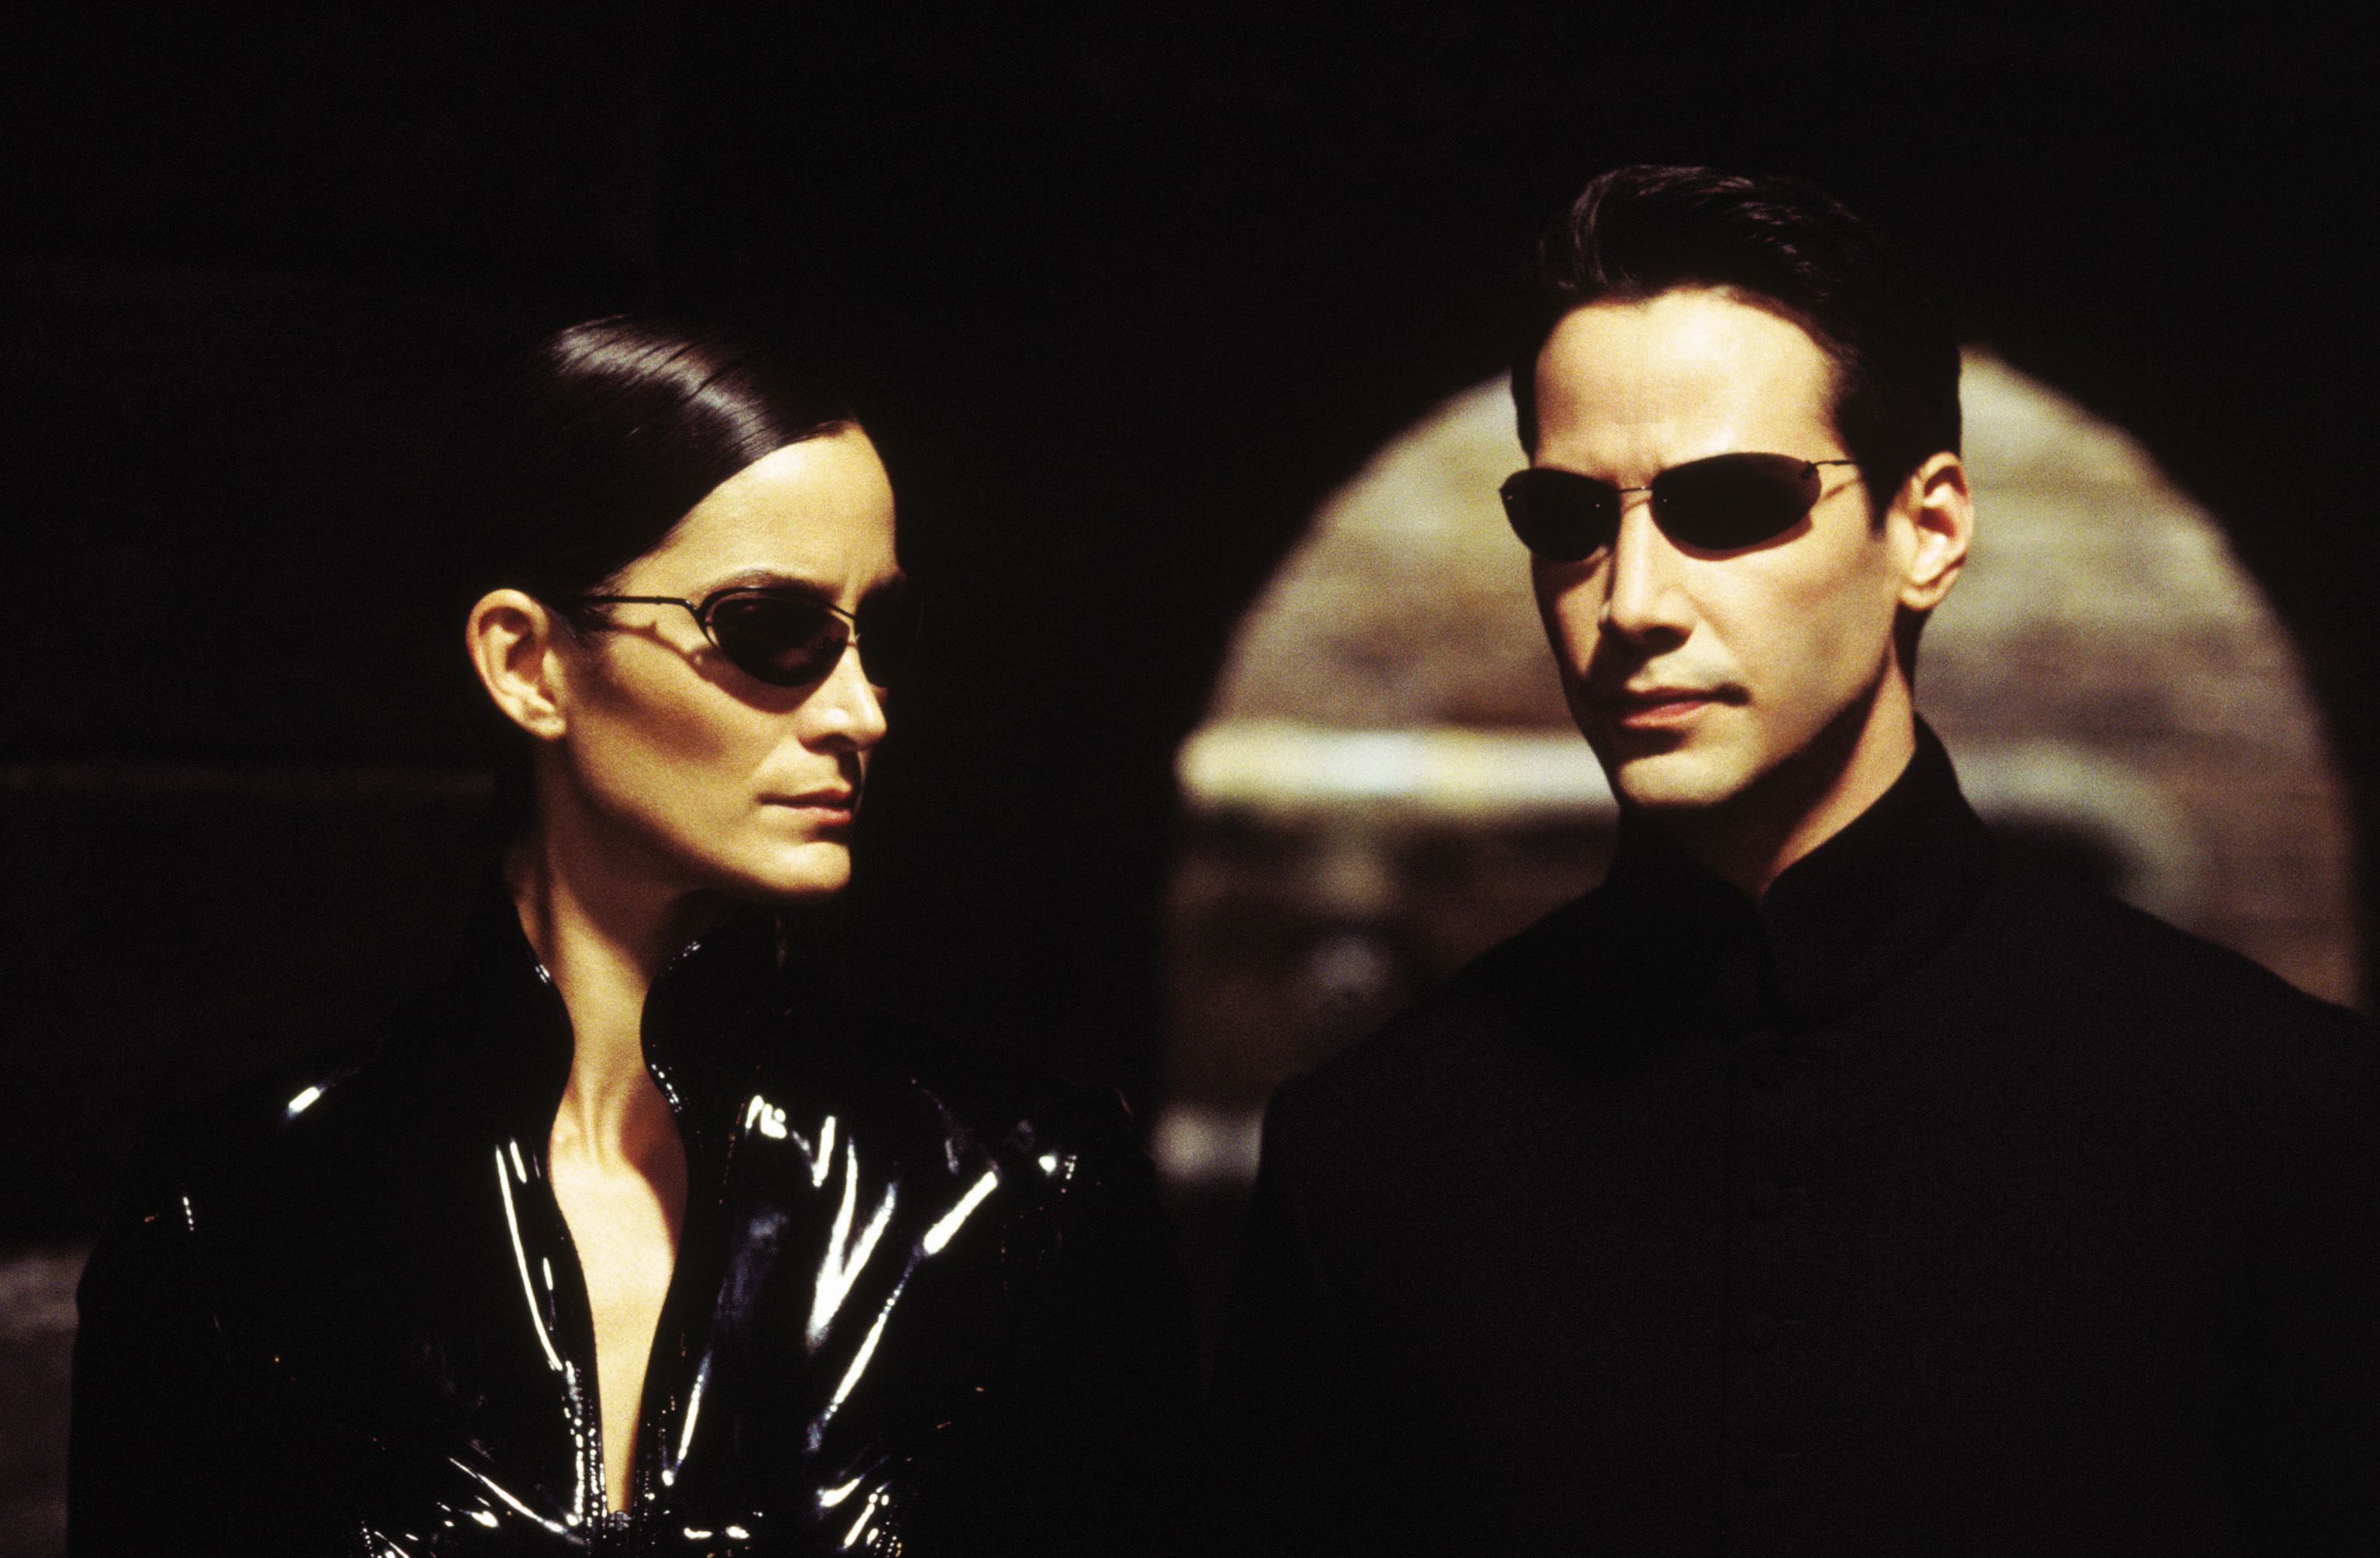 Neo and Trinity The Matrix Reloaded